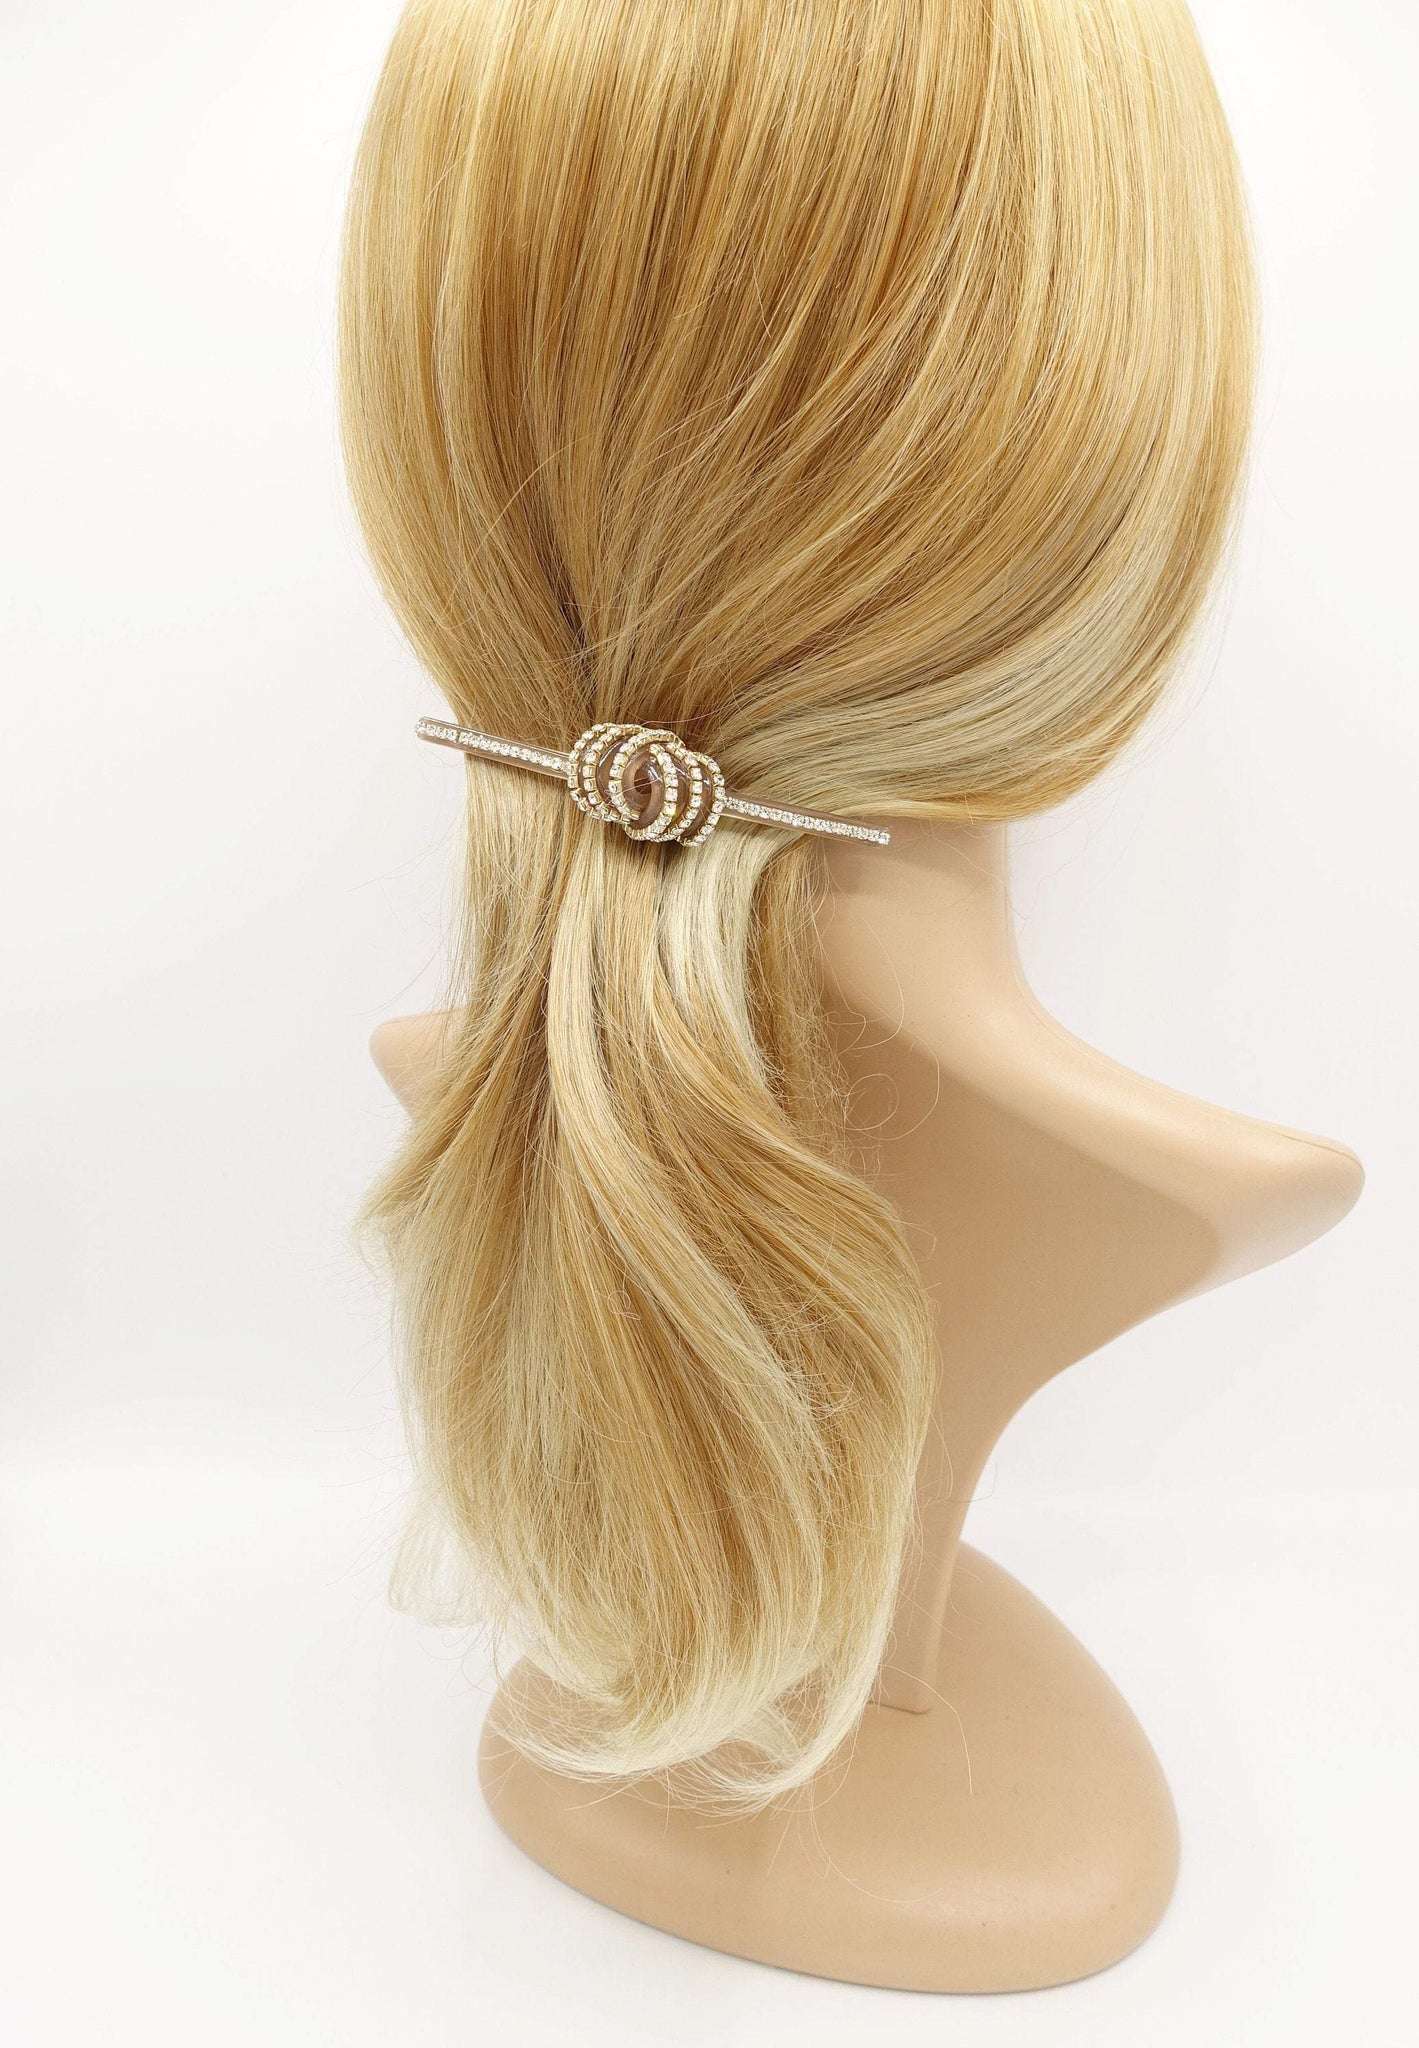 VeryShine claw/banana/barrette cellulose acetate hair barrette triple wrap knot bling style hair barrette for women